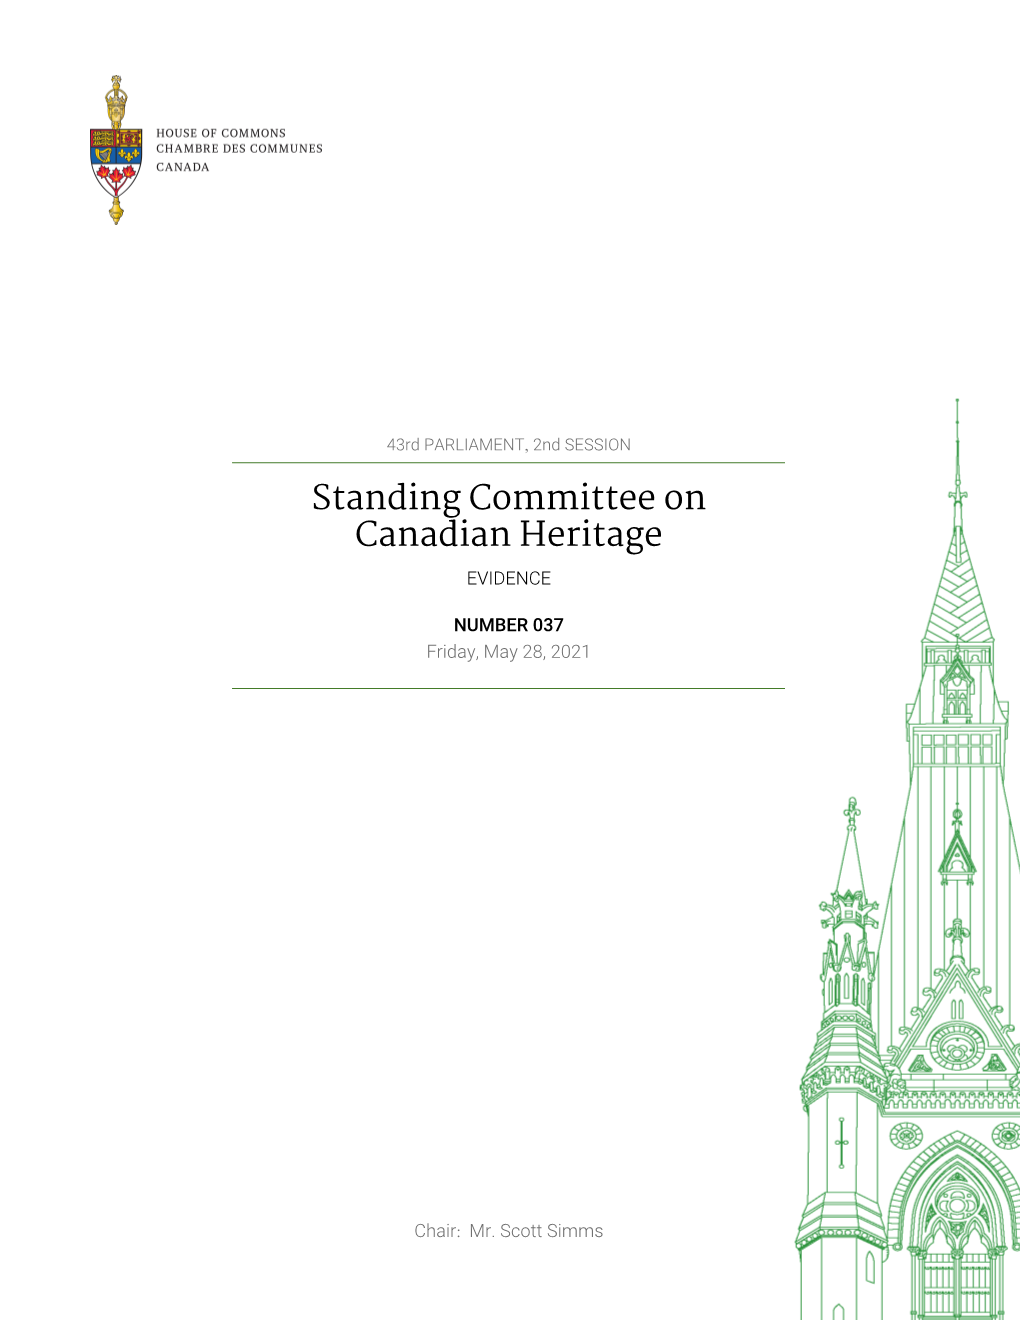 Evidence of the Standing Committee on Canadian Heritage